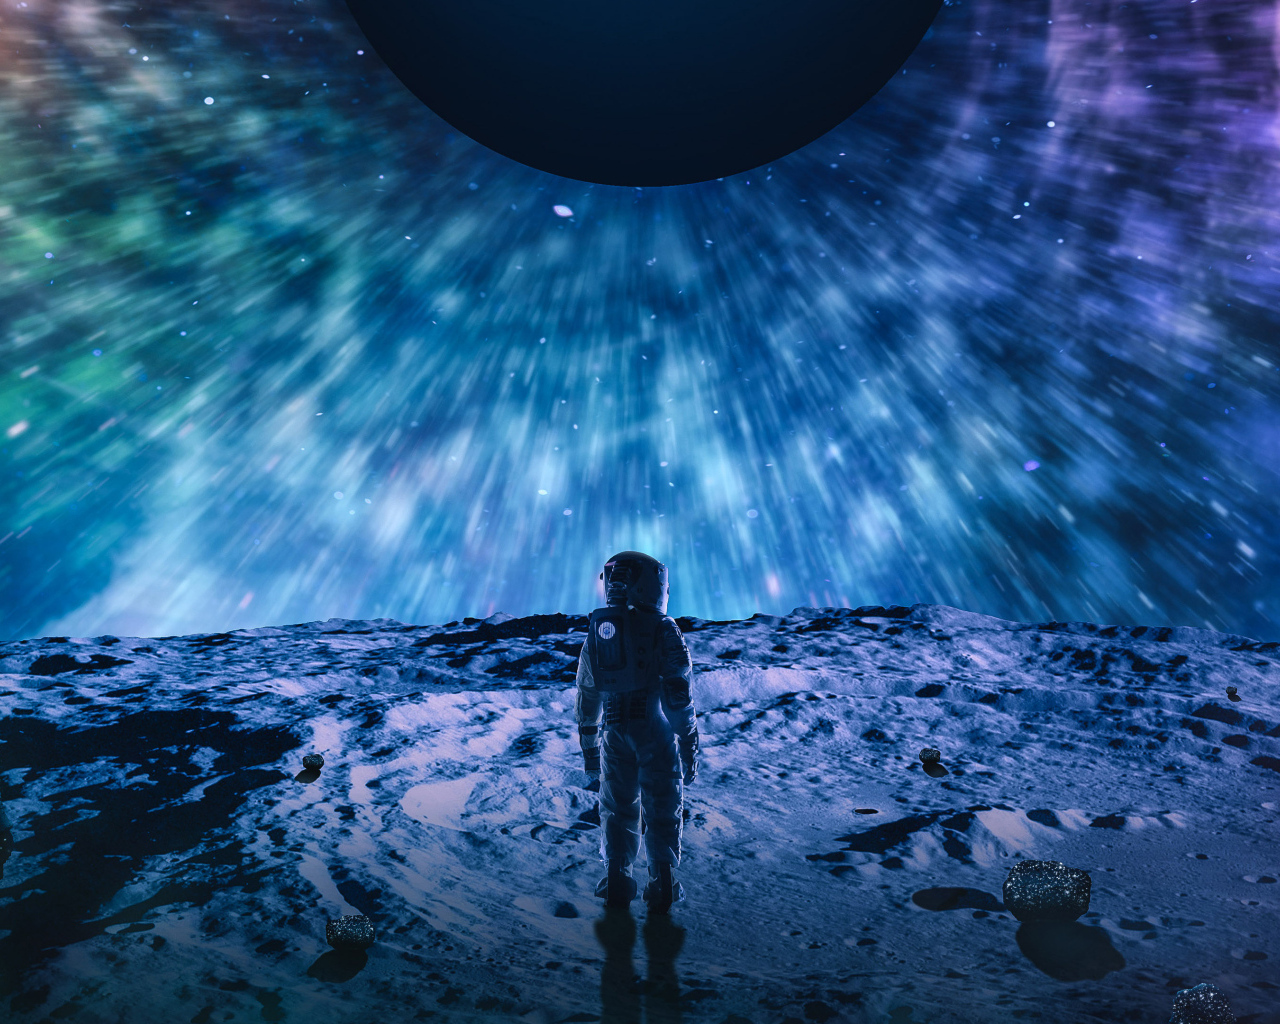 An astronaut stands on the surface of a planet in space